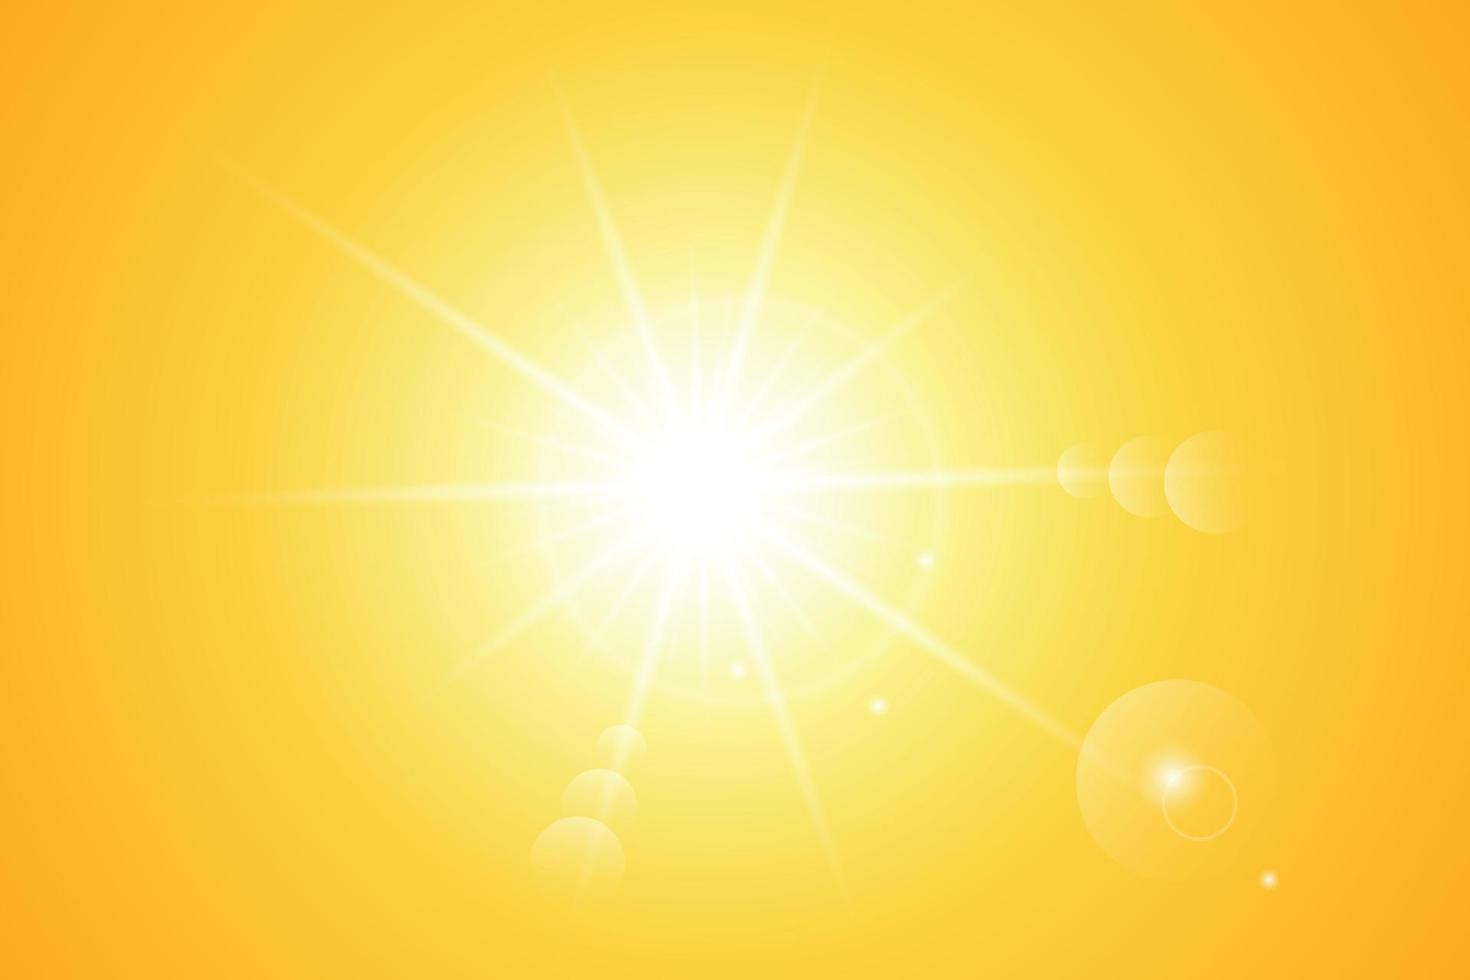 Sun and lens flare on yellow background vector